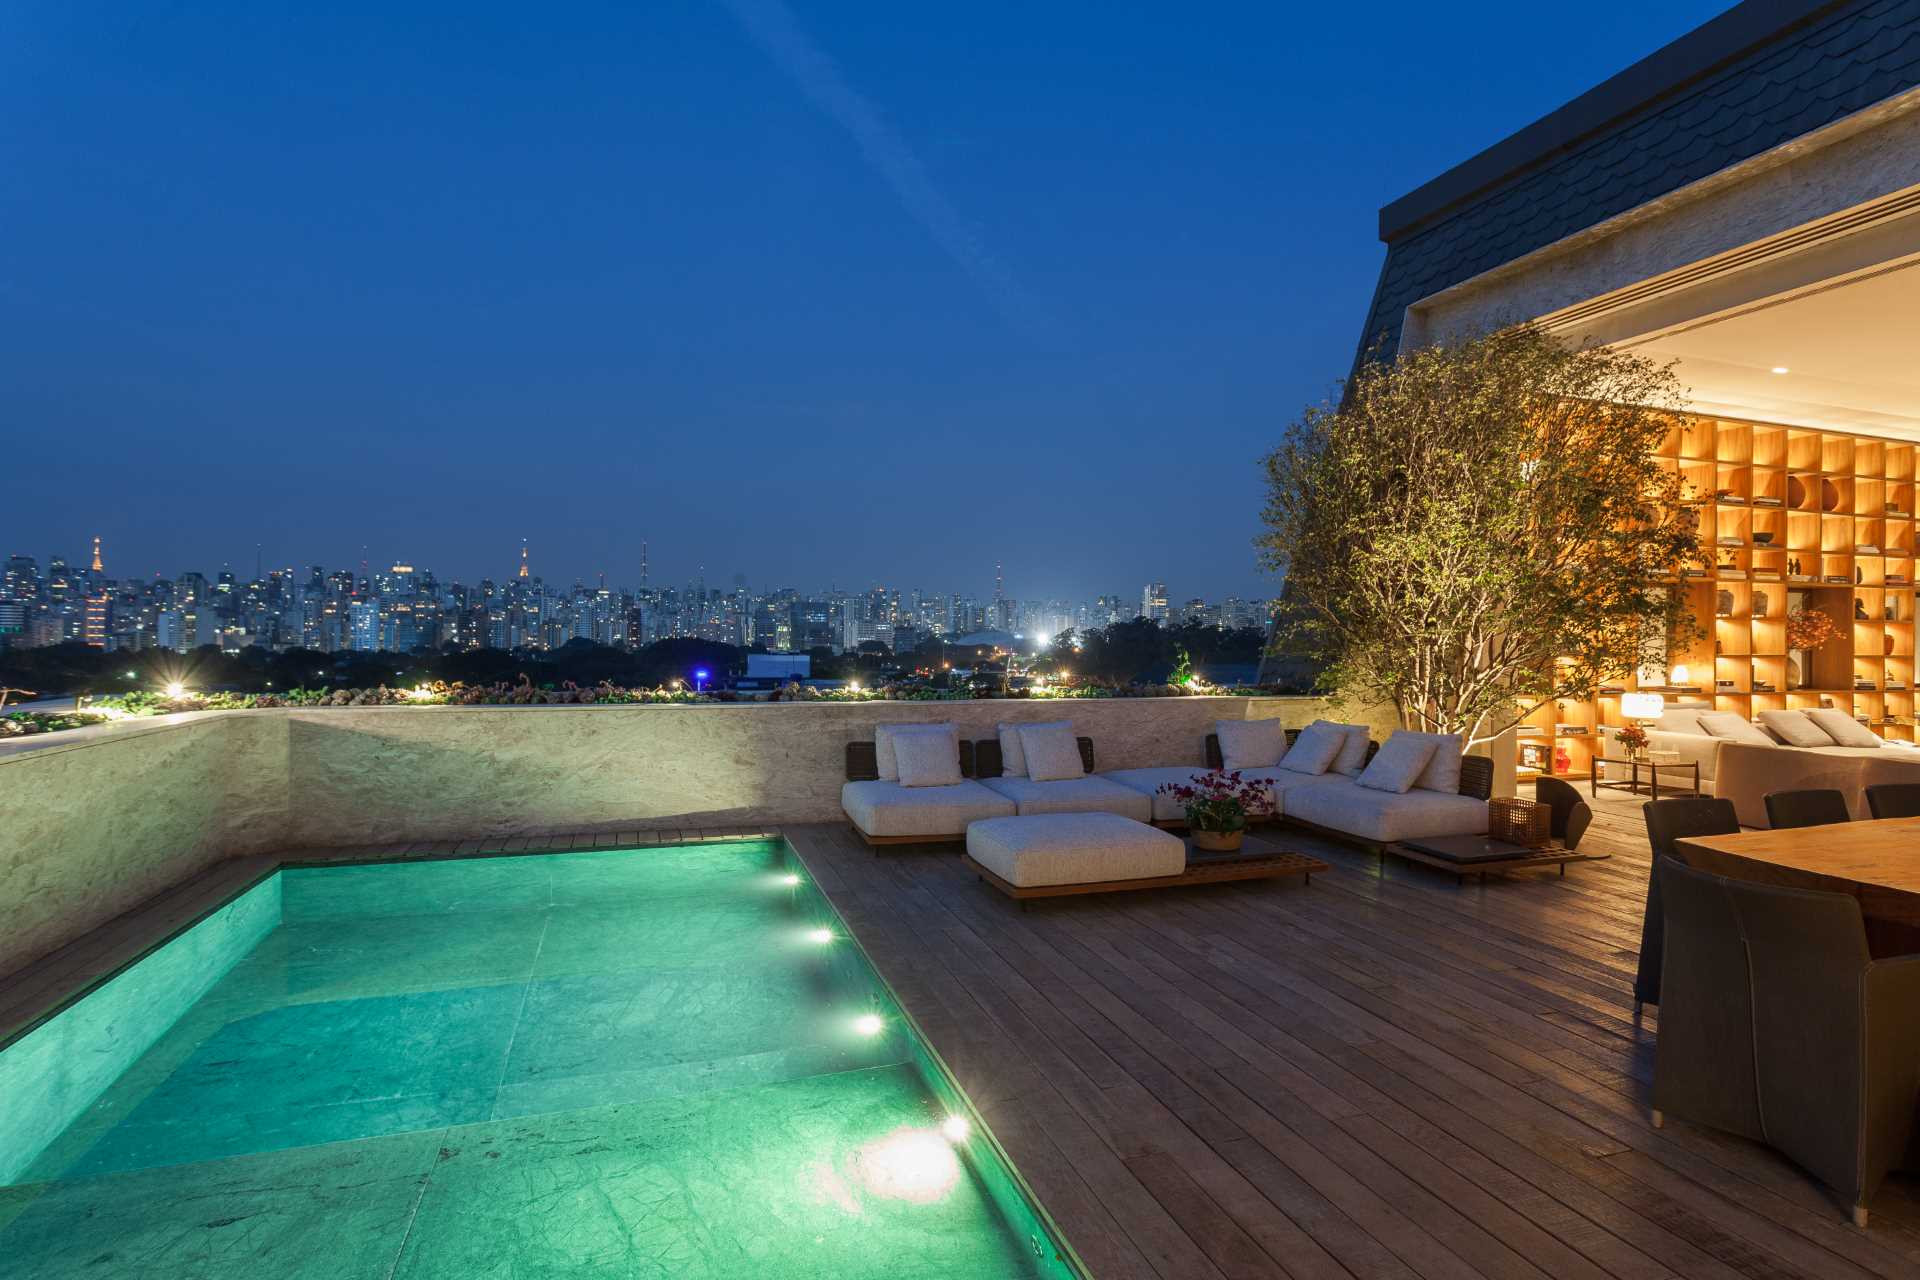 A rooftop deck with a lounge and outdoor dining area, as well as a small pool for hot days. The outdoor space has an unobstructed view of the city lights.